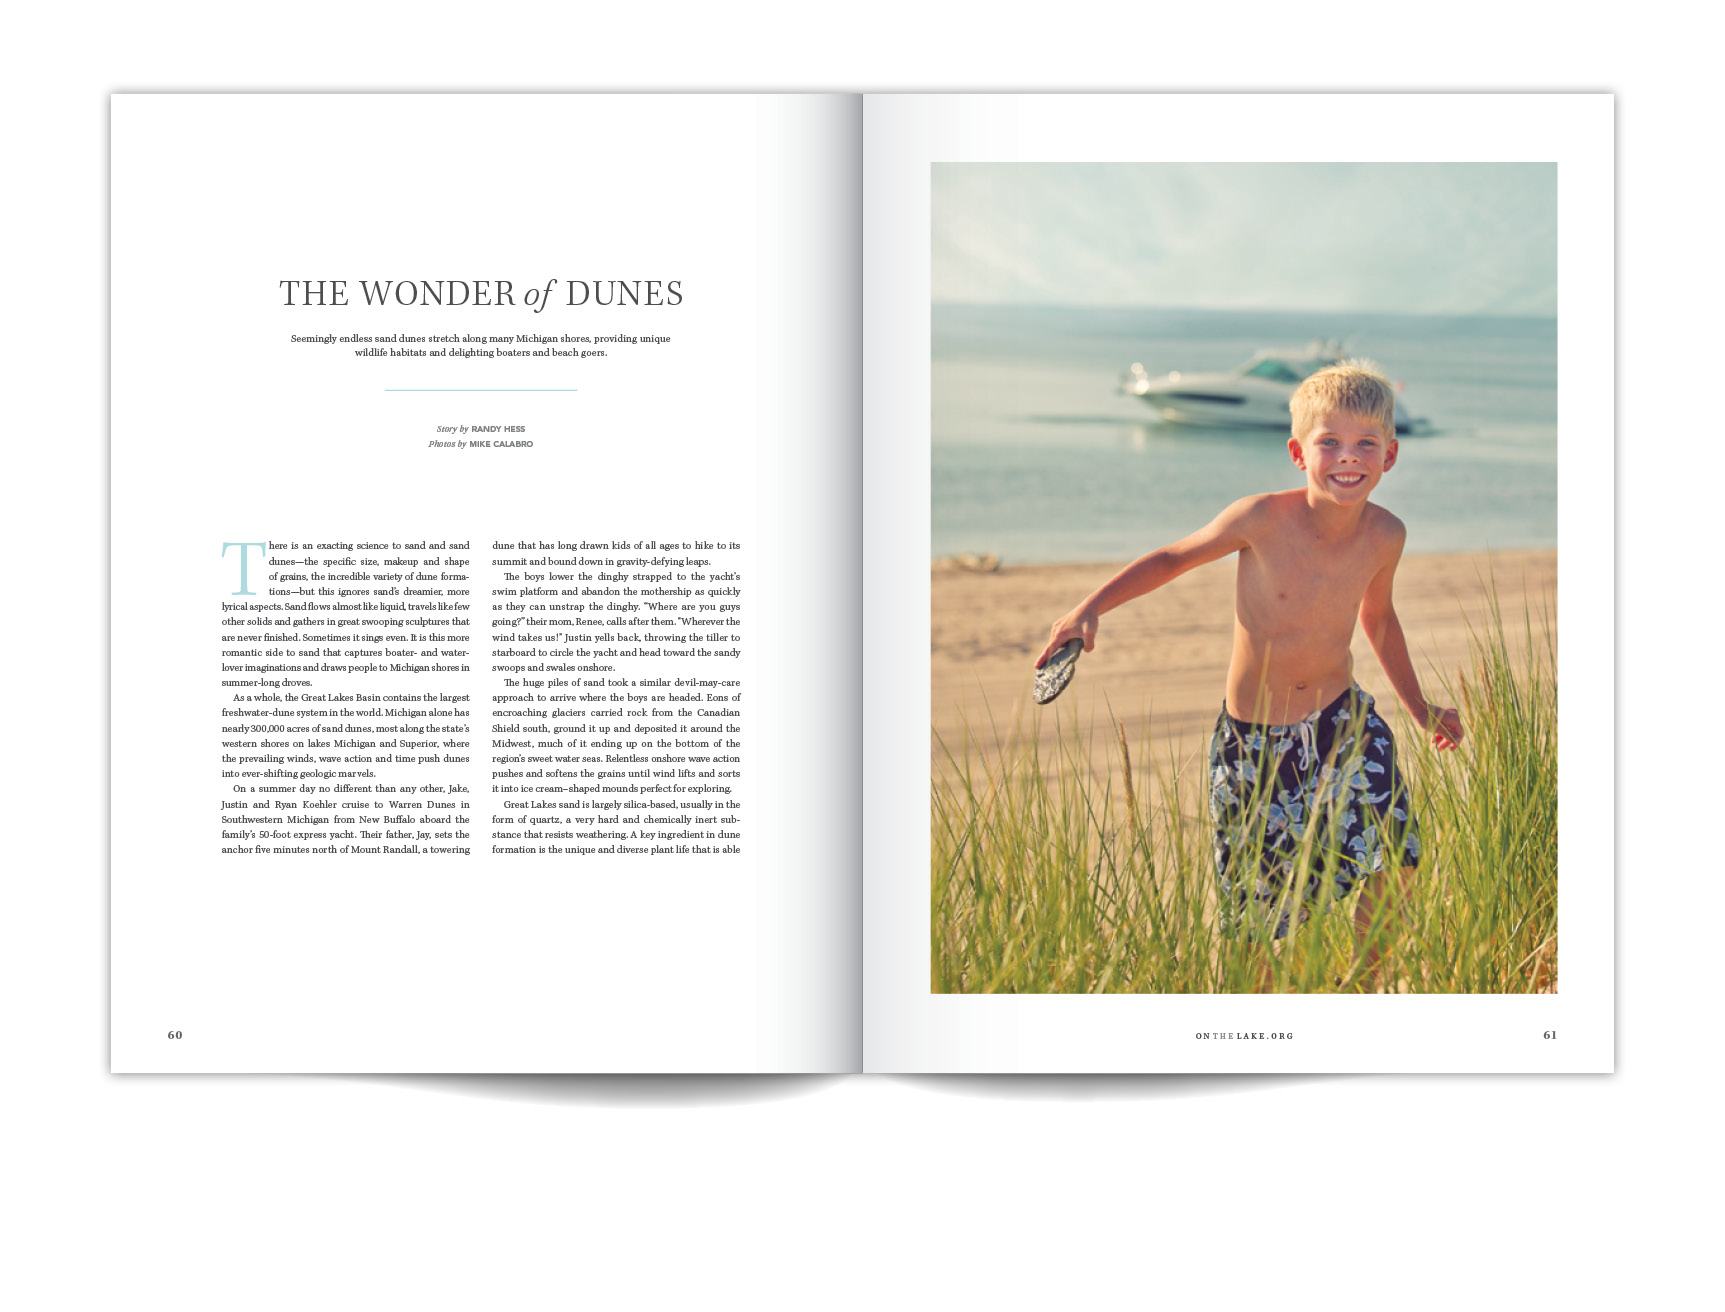  Feature article about the amazing dunes in Michigan.&nbsp; 